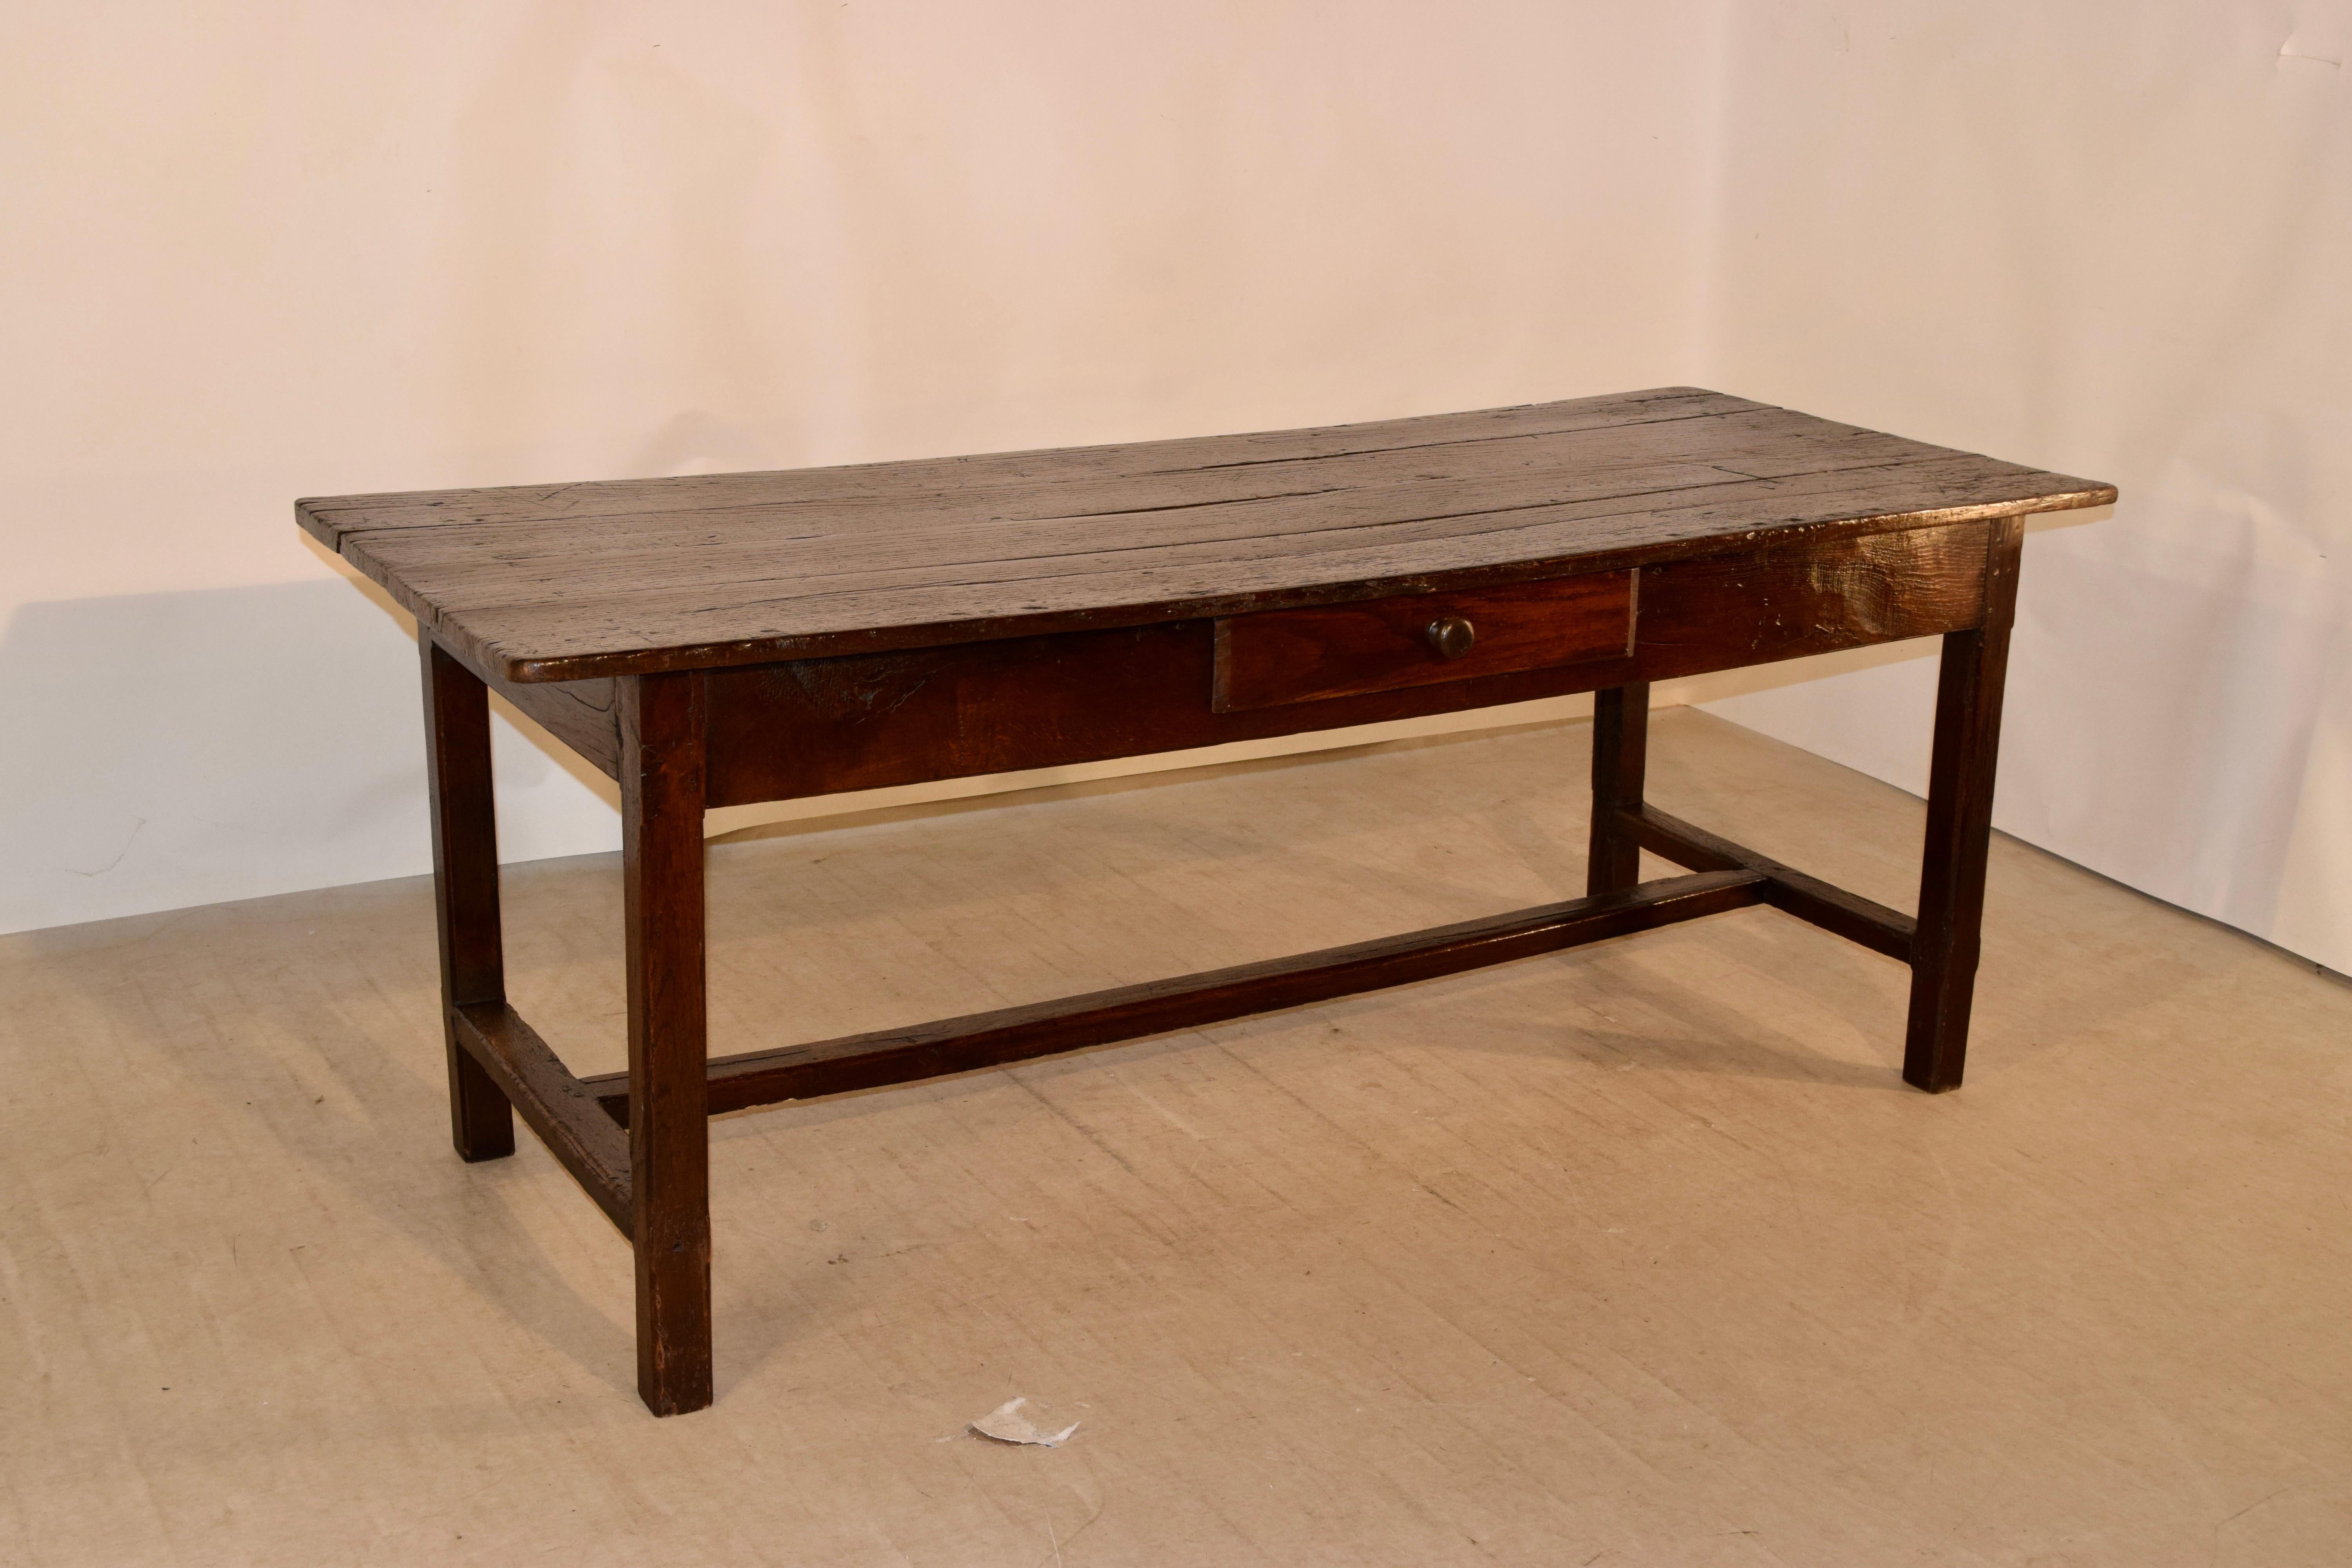 Country Early 19th Century Chestnut Table